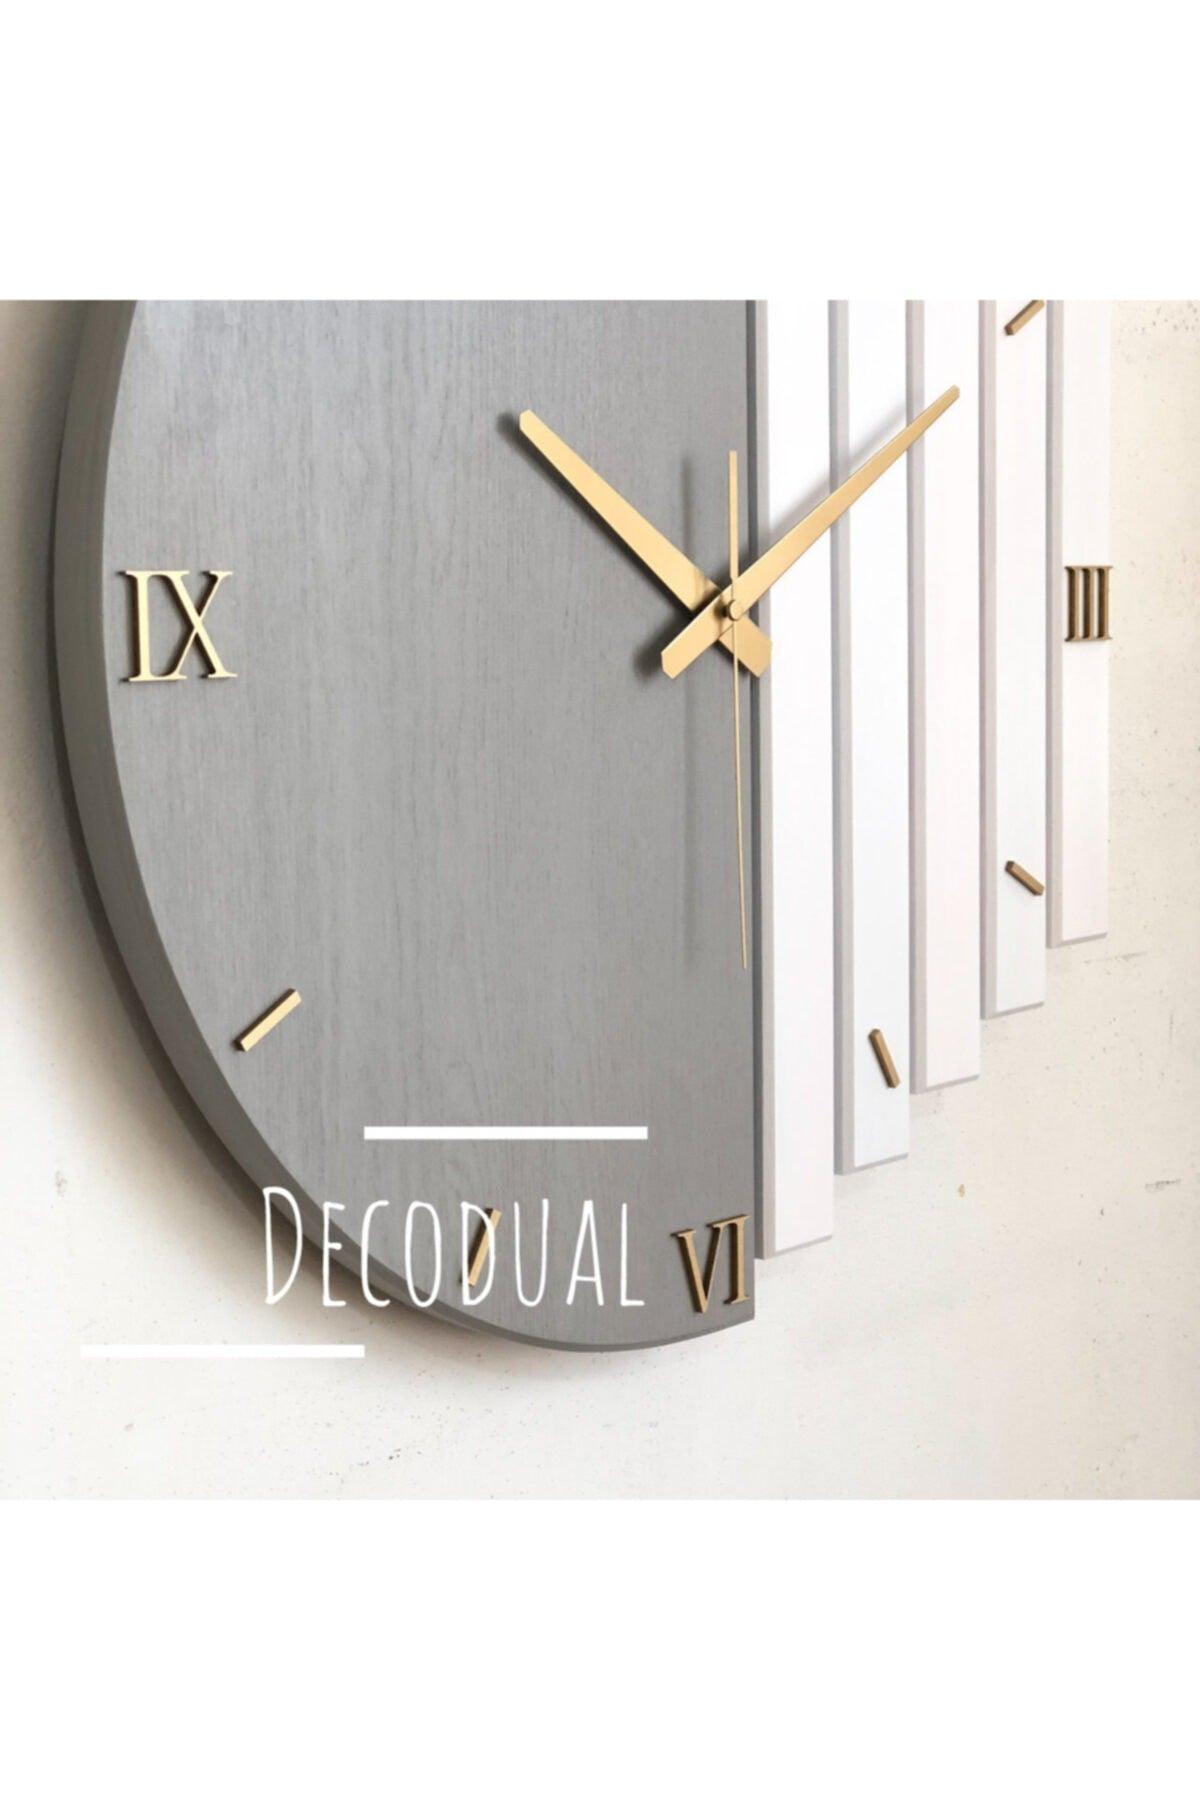 Handmade Solid Wood Wall Clock 40x40cm Mink Gray And White - Swordslife